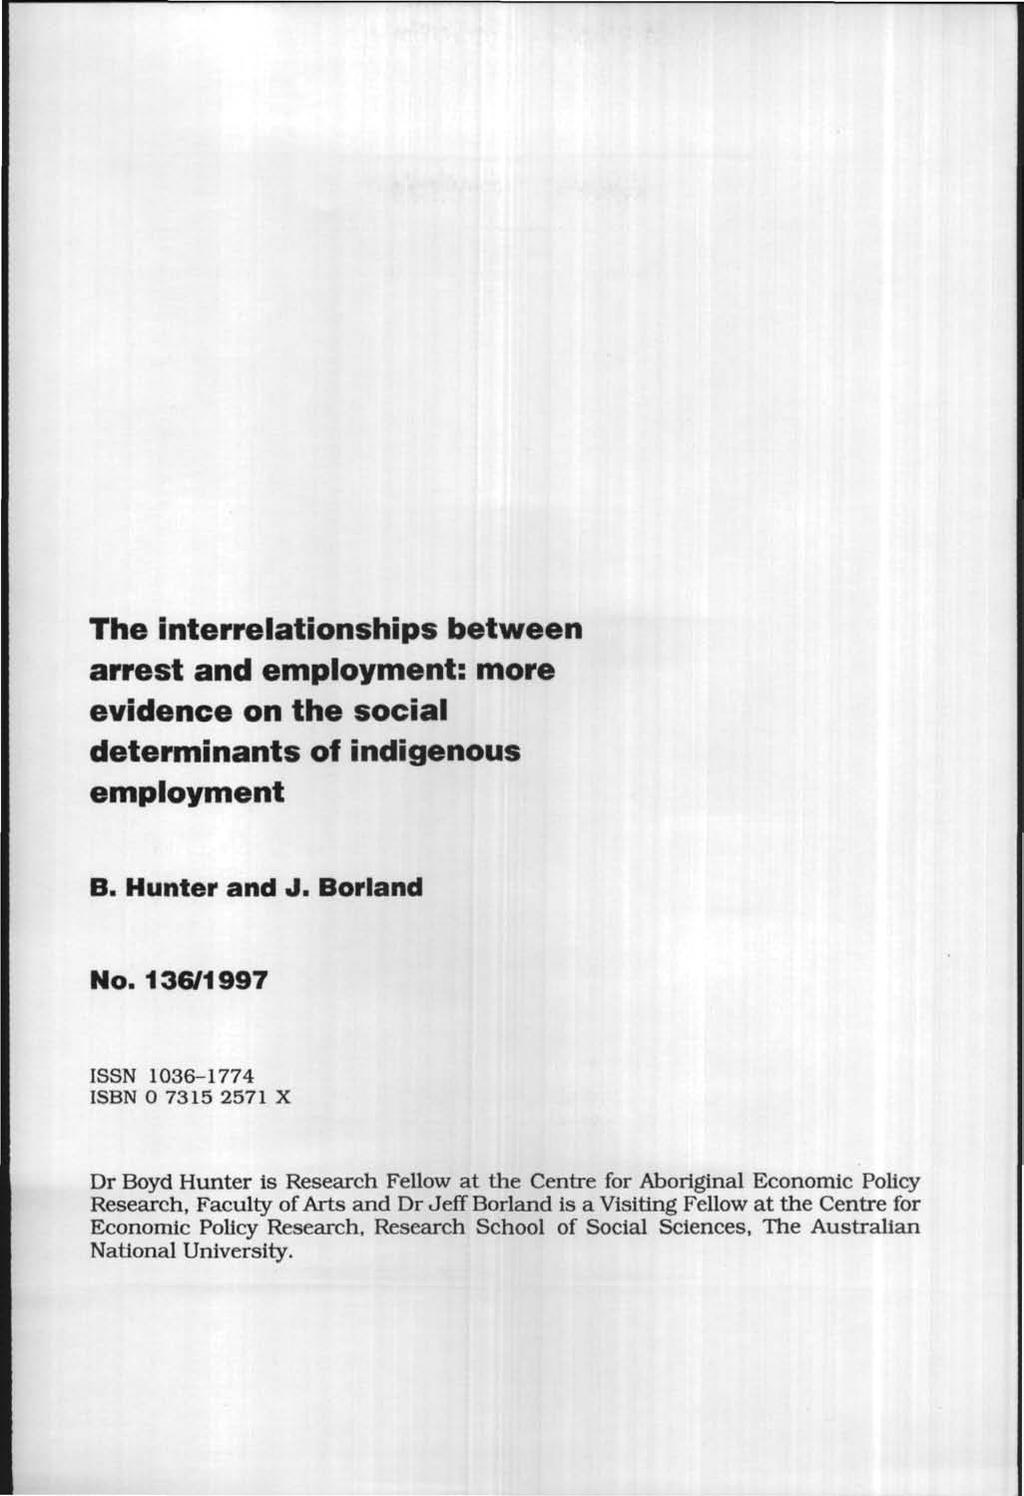 The interrelationships between arrest and employment: more evidence on the social determinants of indigenous employment B. Hunter and J. Borland No.